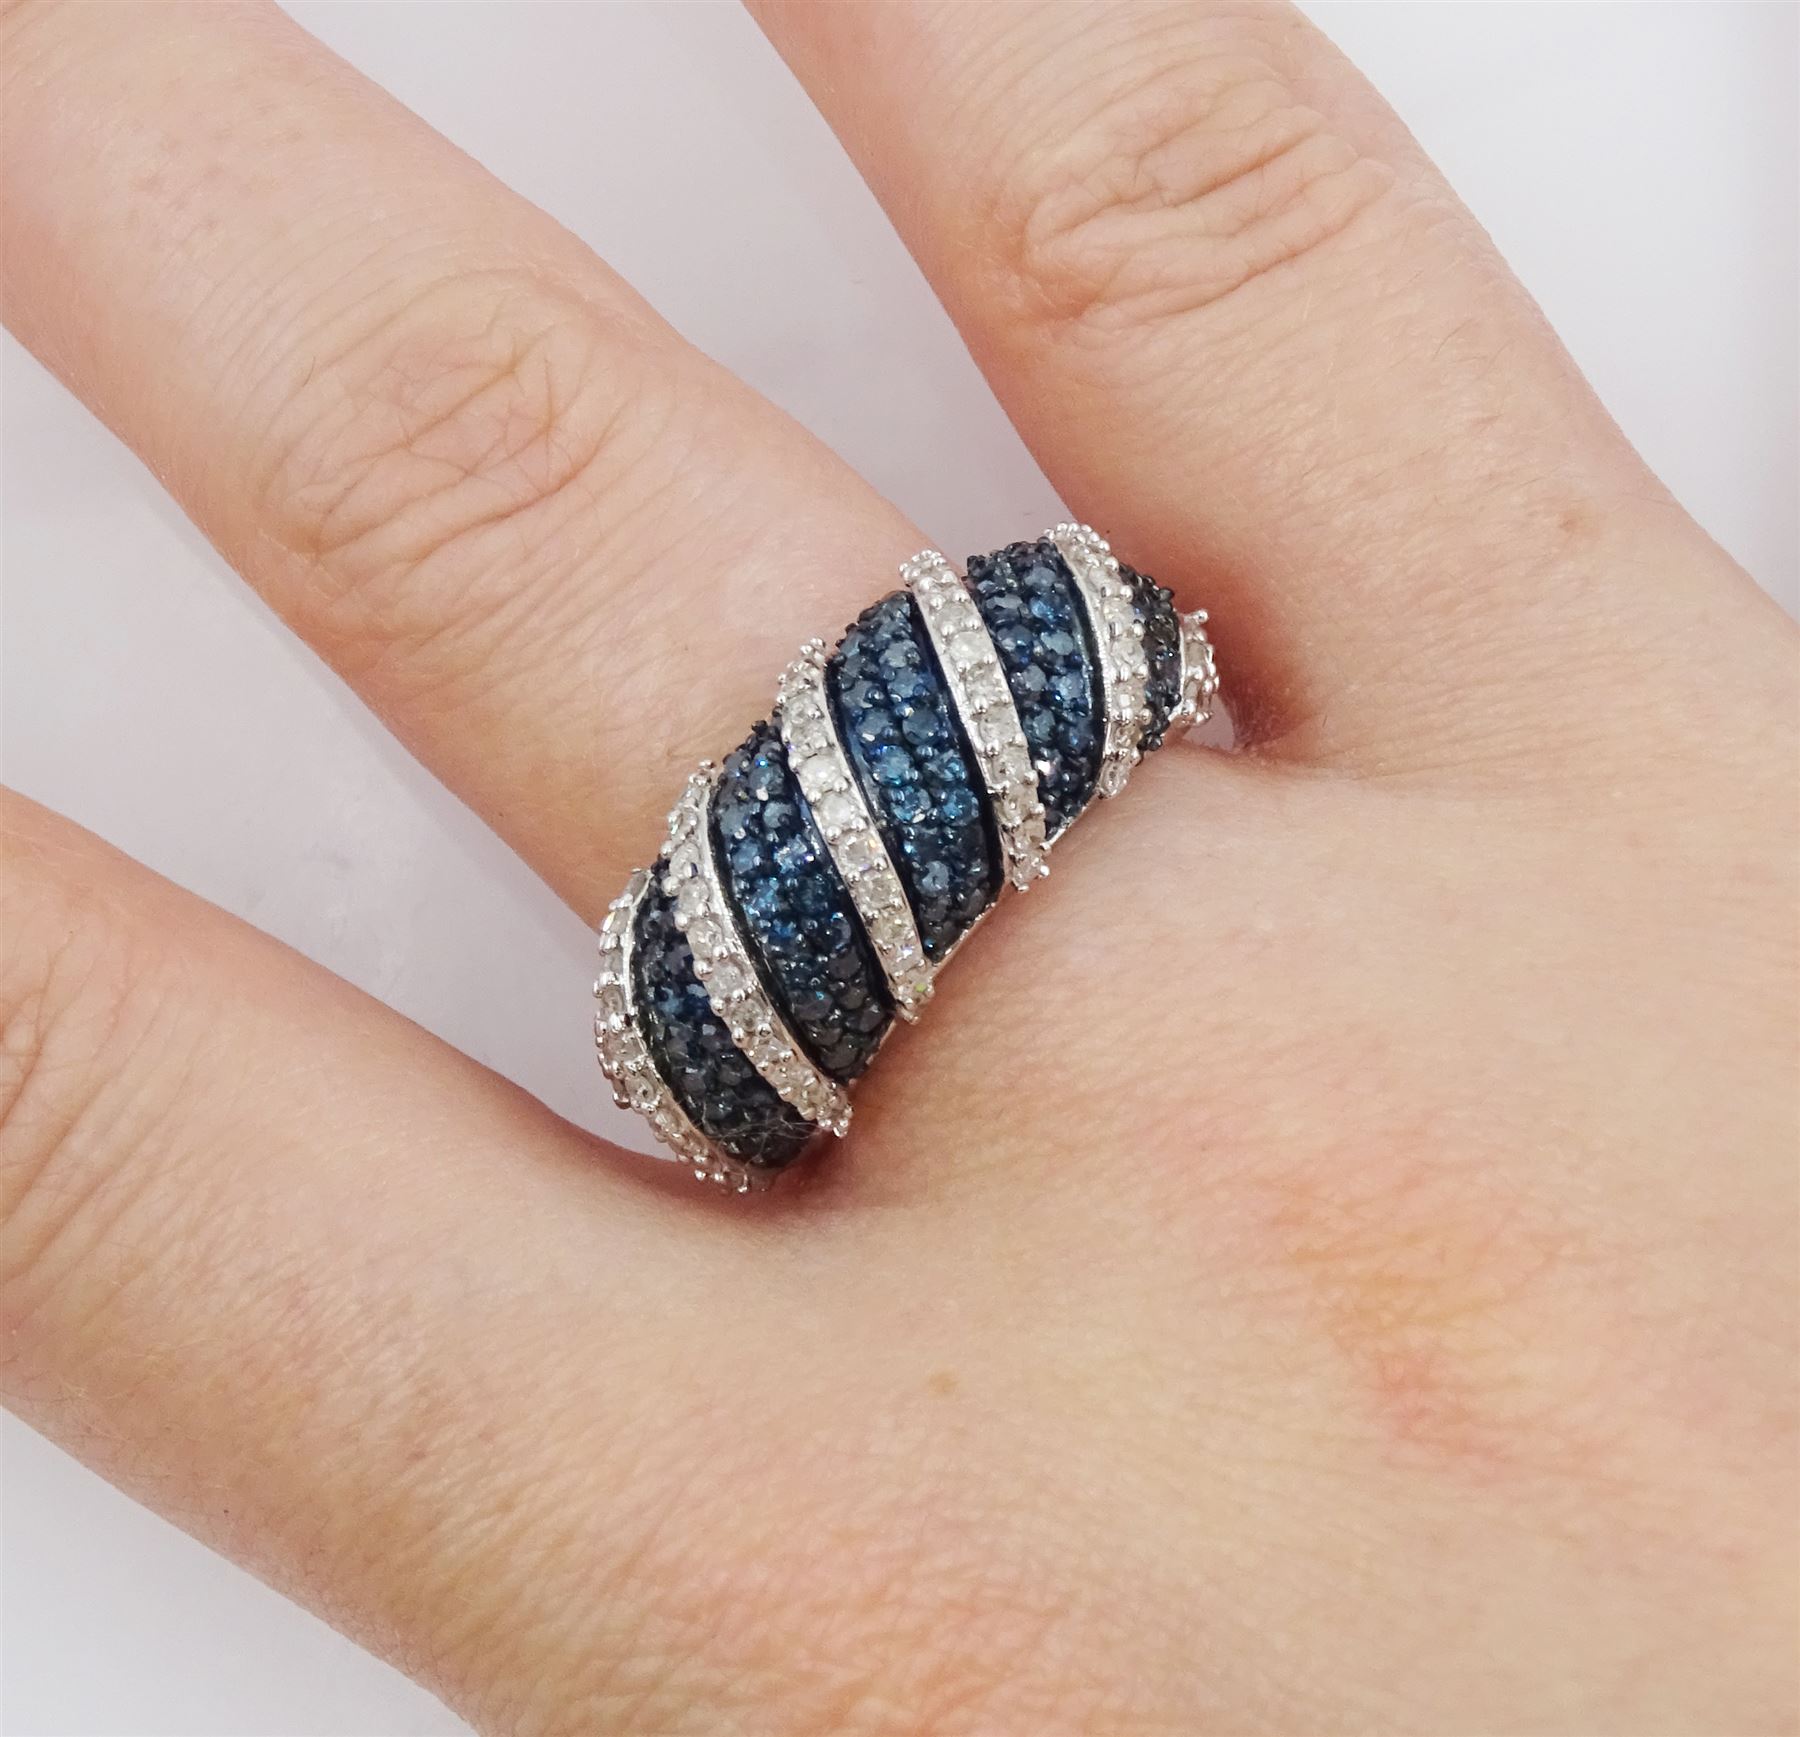 White gold pave set blue and white diamond ring - Image 2 of 4